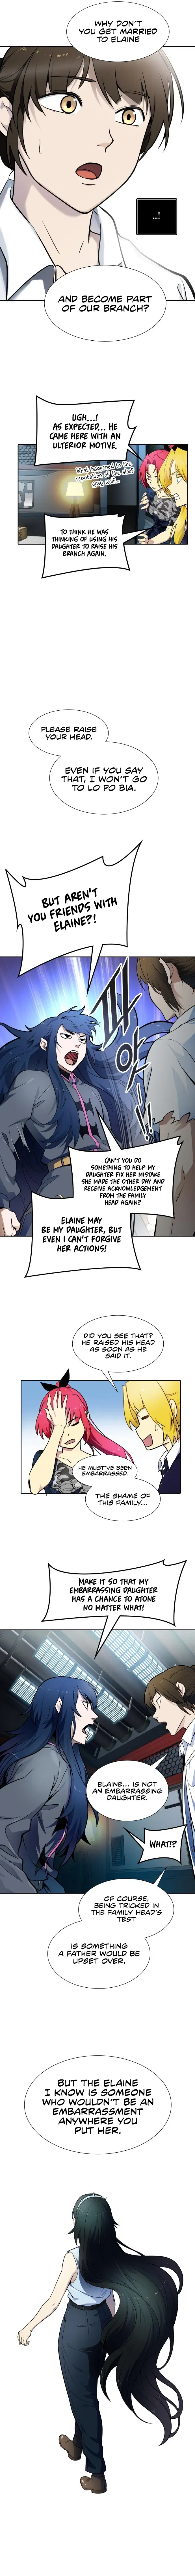 Tower of God Chapter 577 page 9